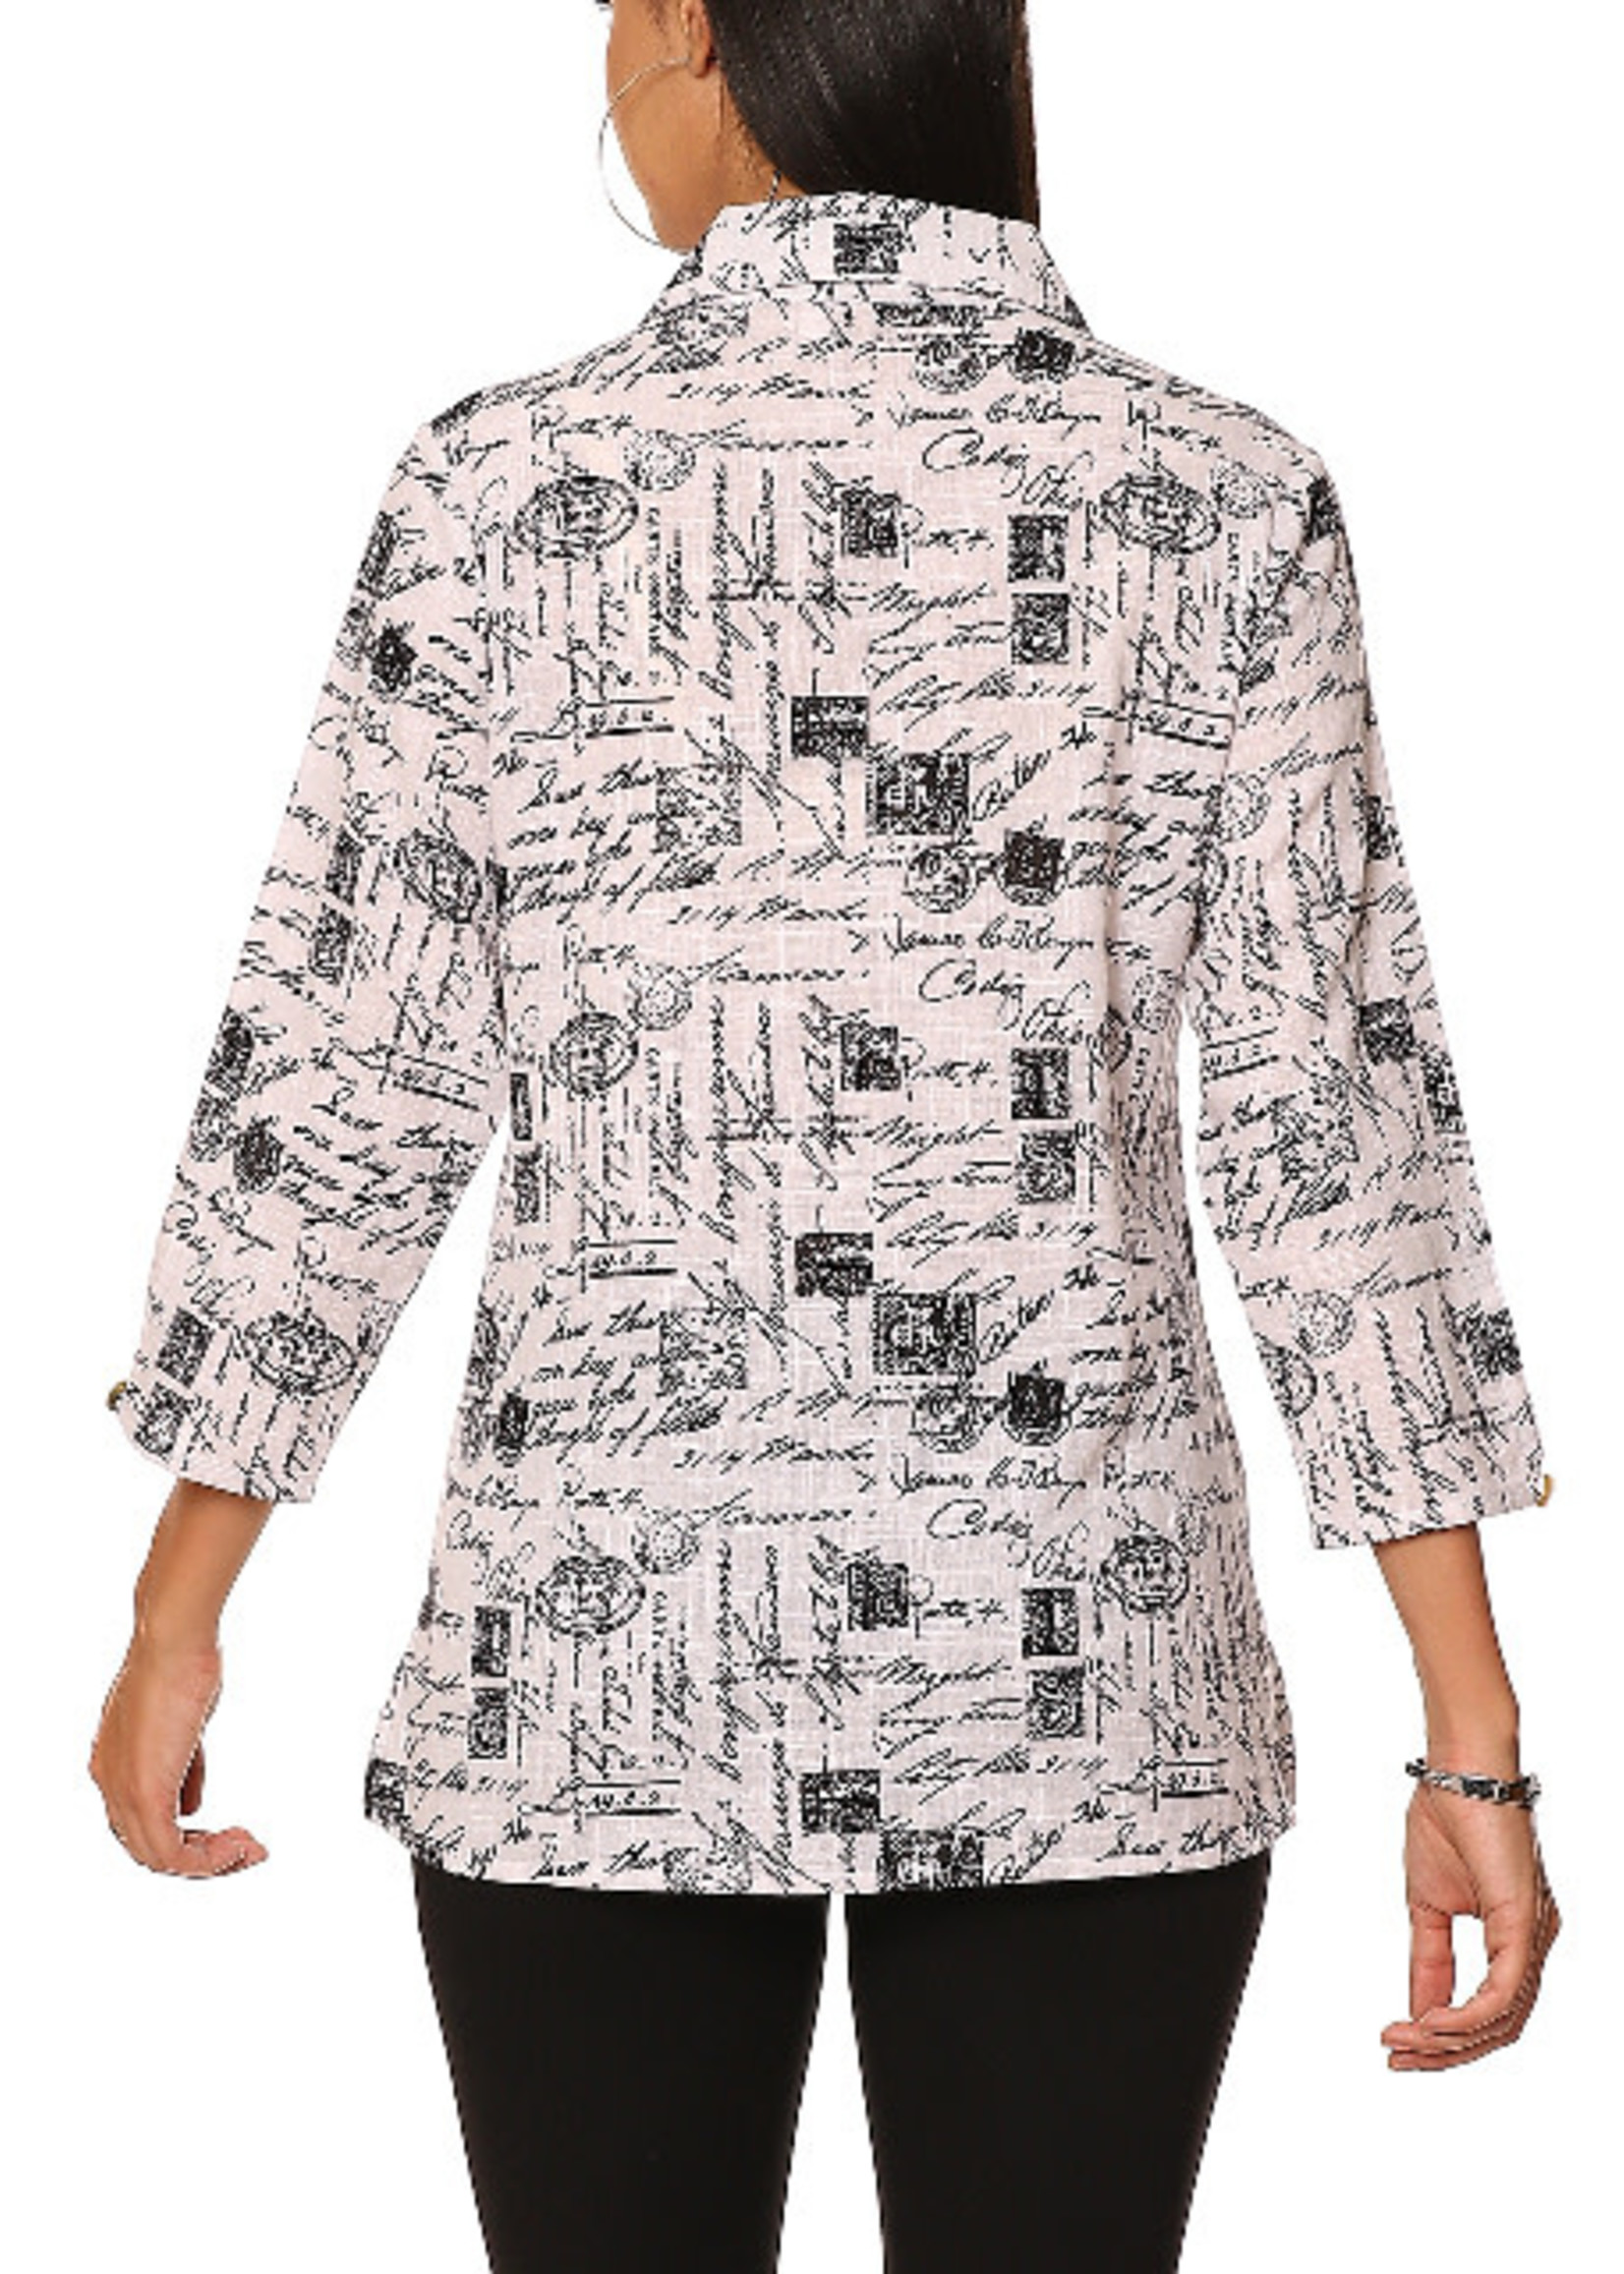 Parsley and Sage Postage Print Button Down Shirt